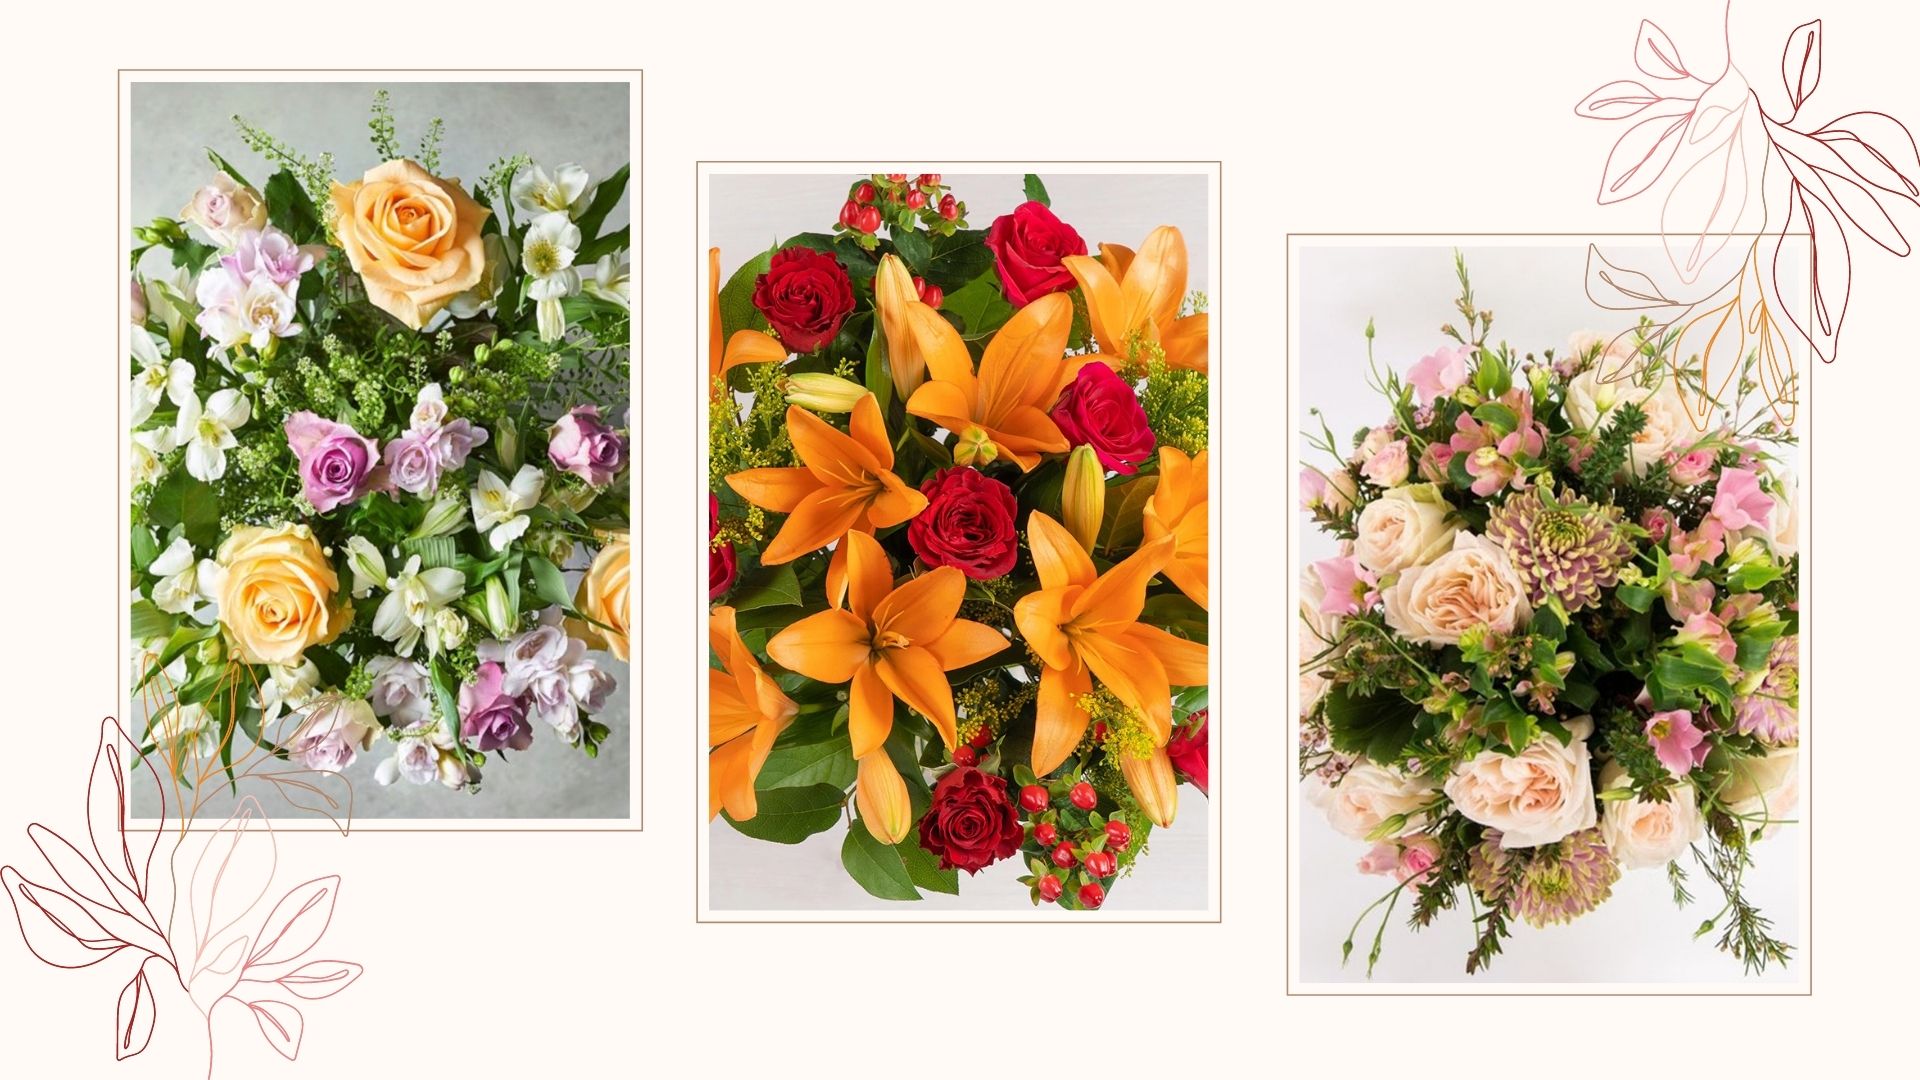 The 25 Best Florists In London For Delivery In 2021 - Tatler